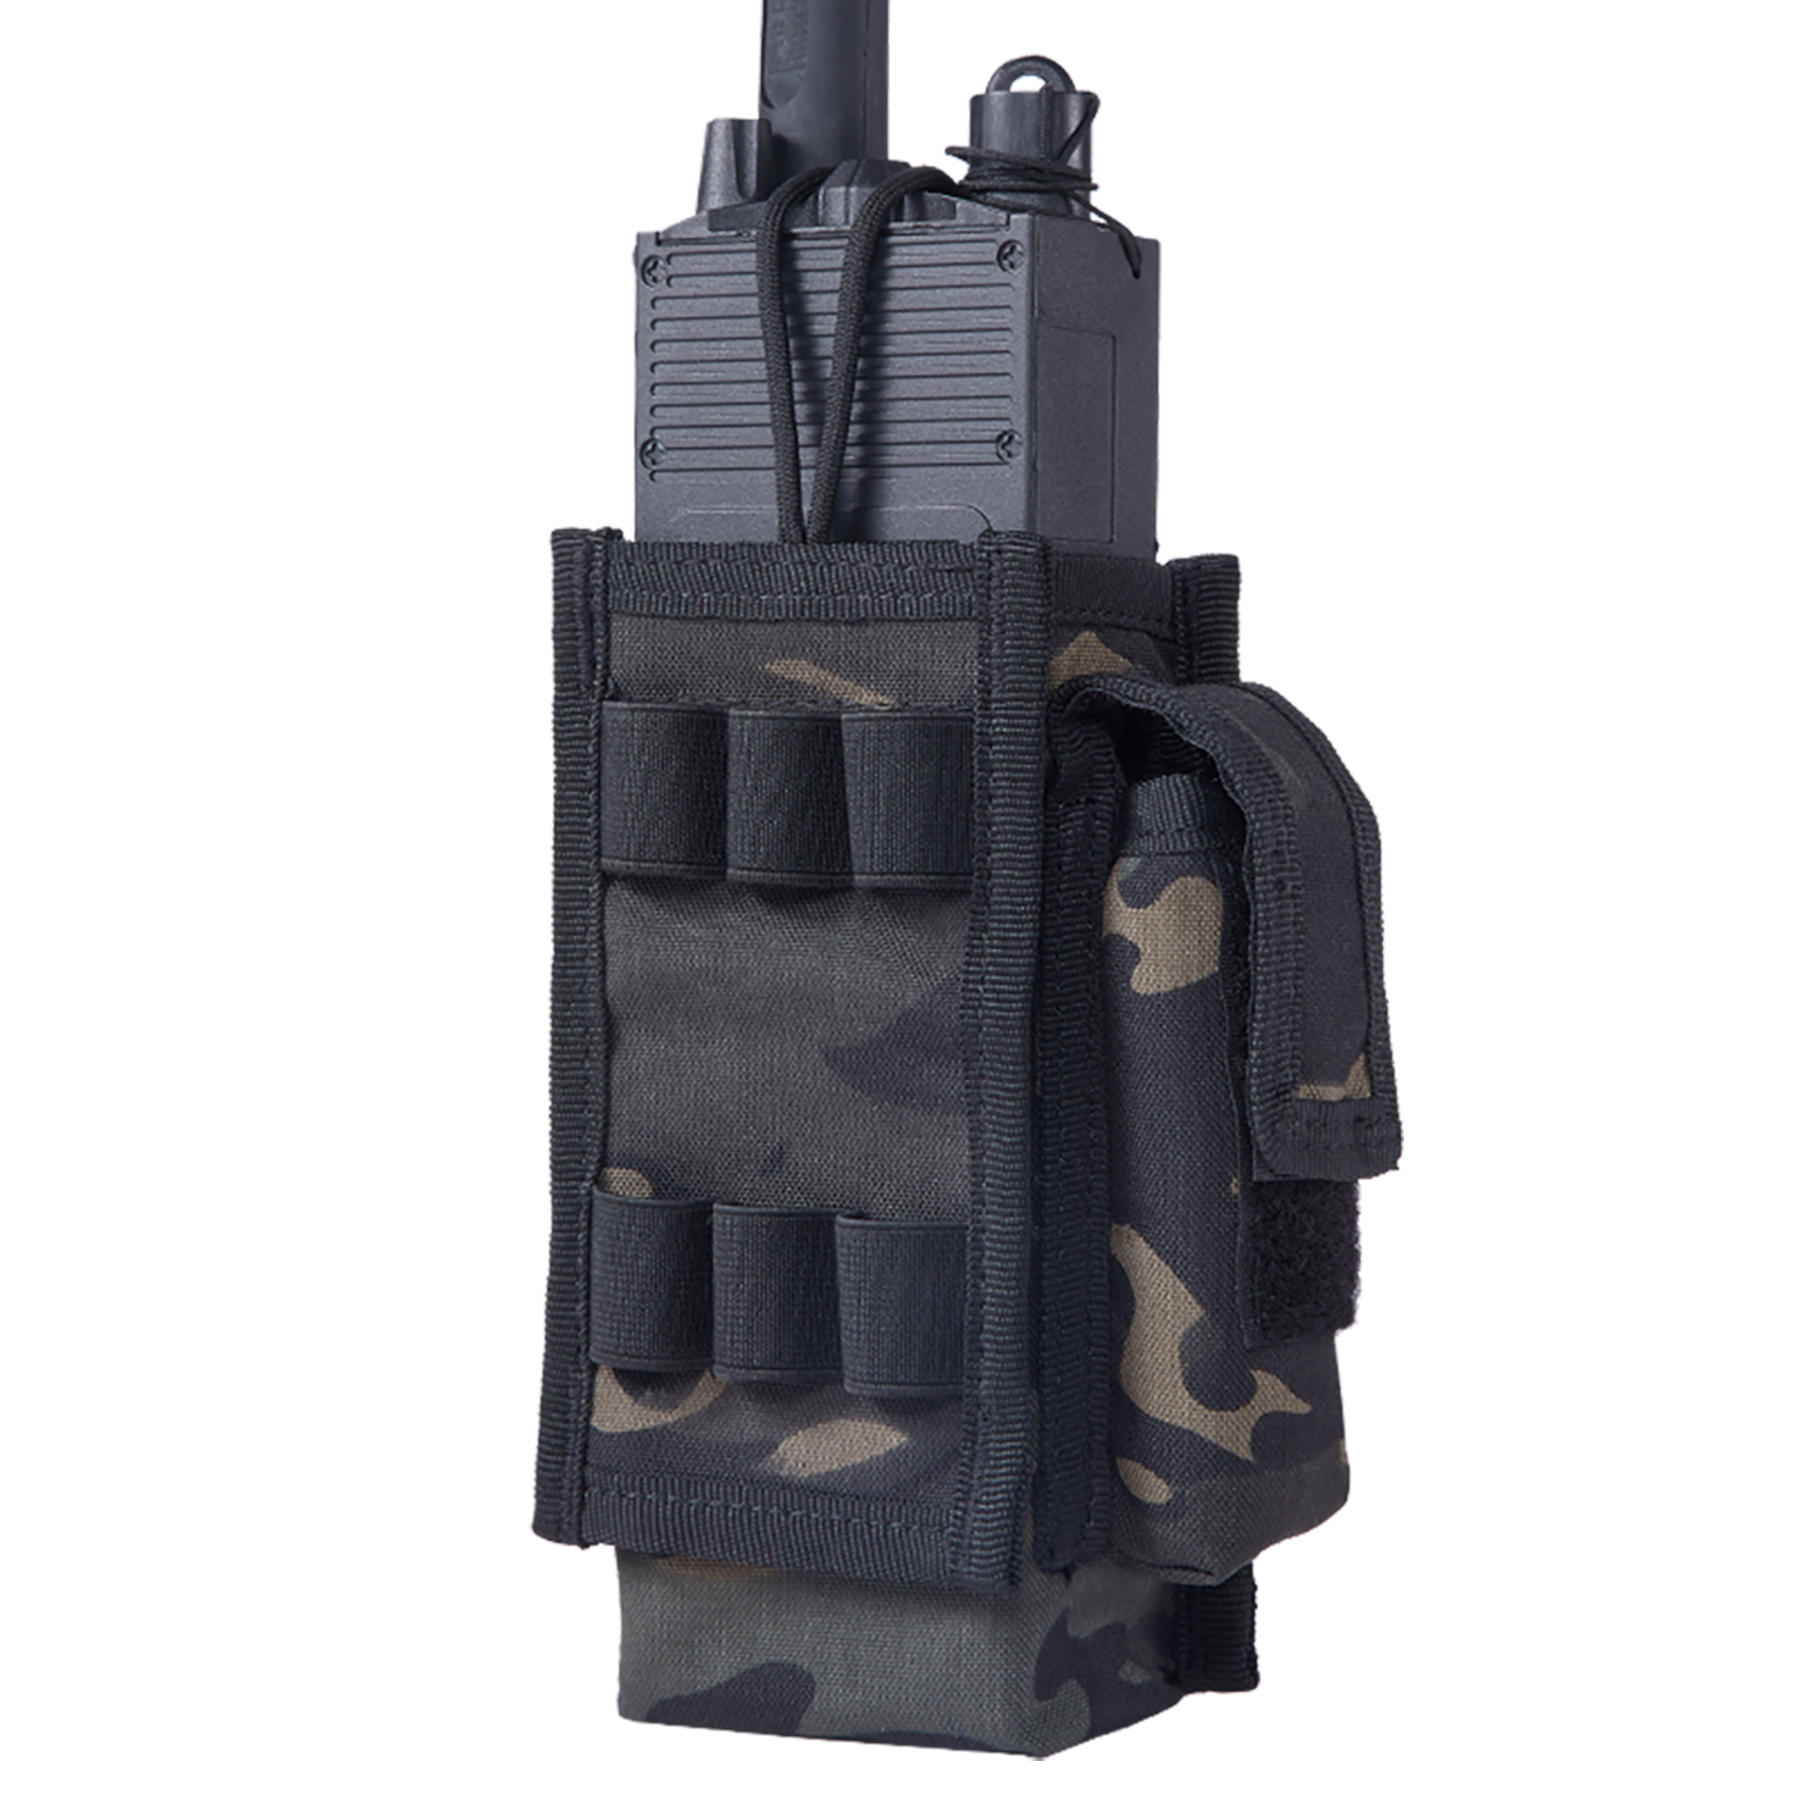 IDOGEAR Tactical Radio Pouch Molle Radio Holder for Walkie Talkies PRC 148/152 Radio Airsoft Military Outdoor Sports 500D Nylon 3521-IDOGEAR INDUSTRIAL